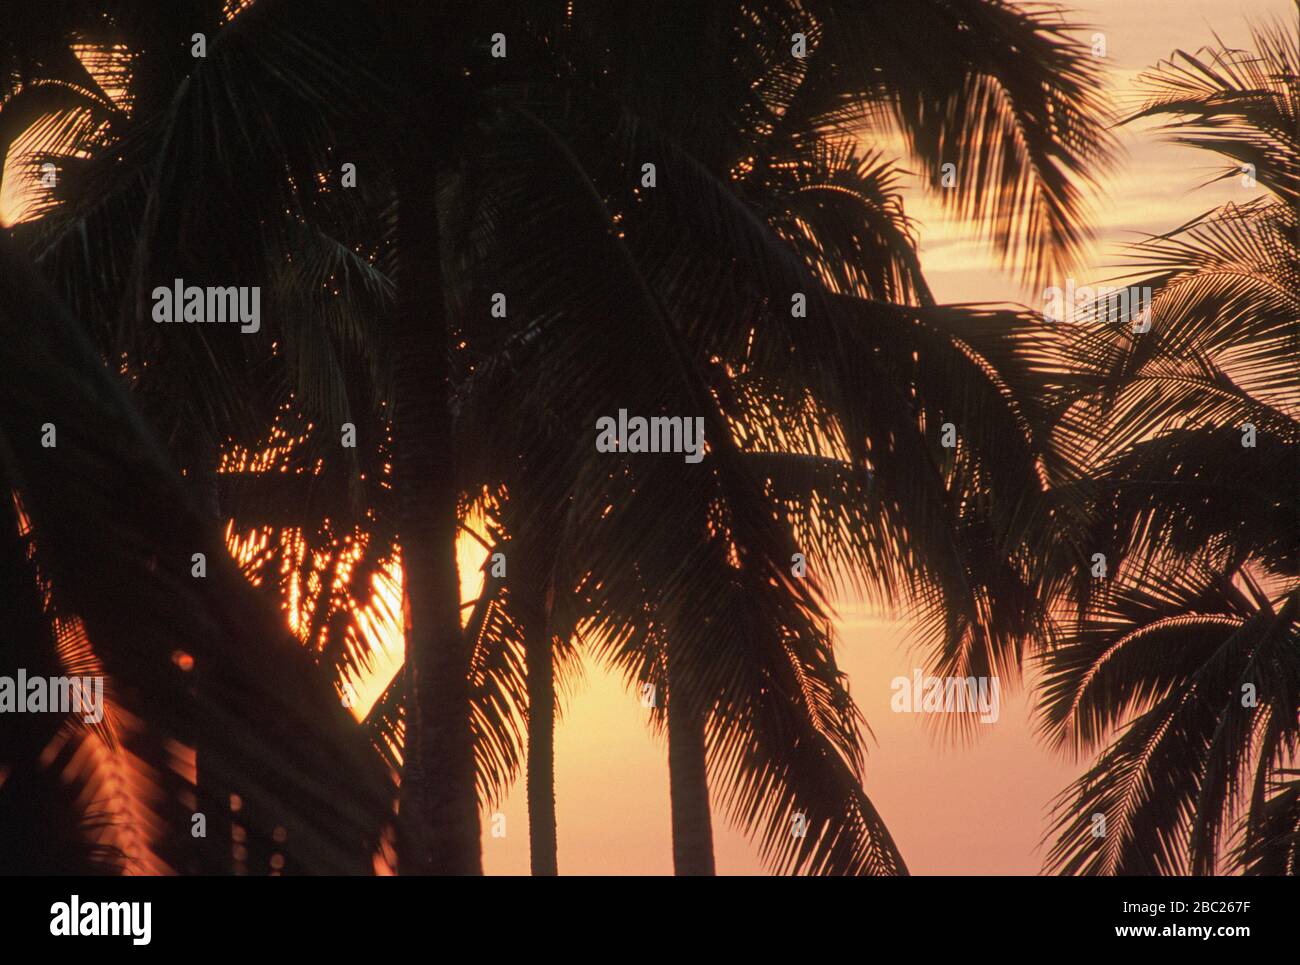 Sunset over the Pacific Ocean, seen through palm trees from Careyes, Jalisco, Mexico. Stock Photo